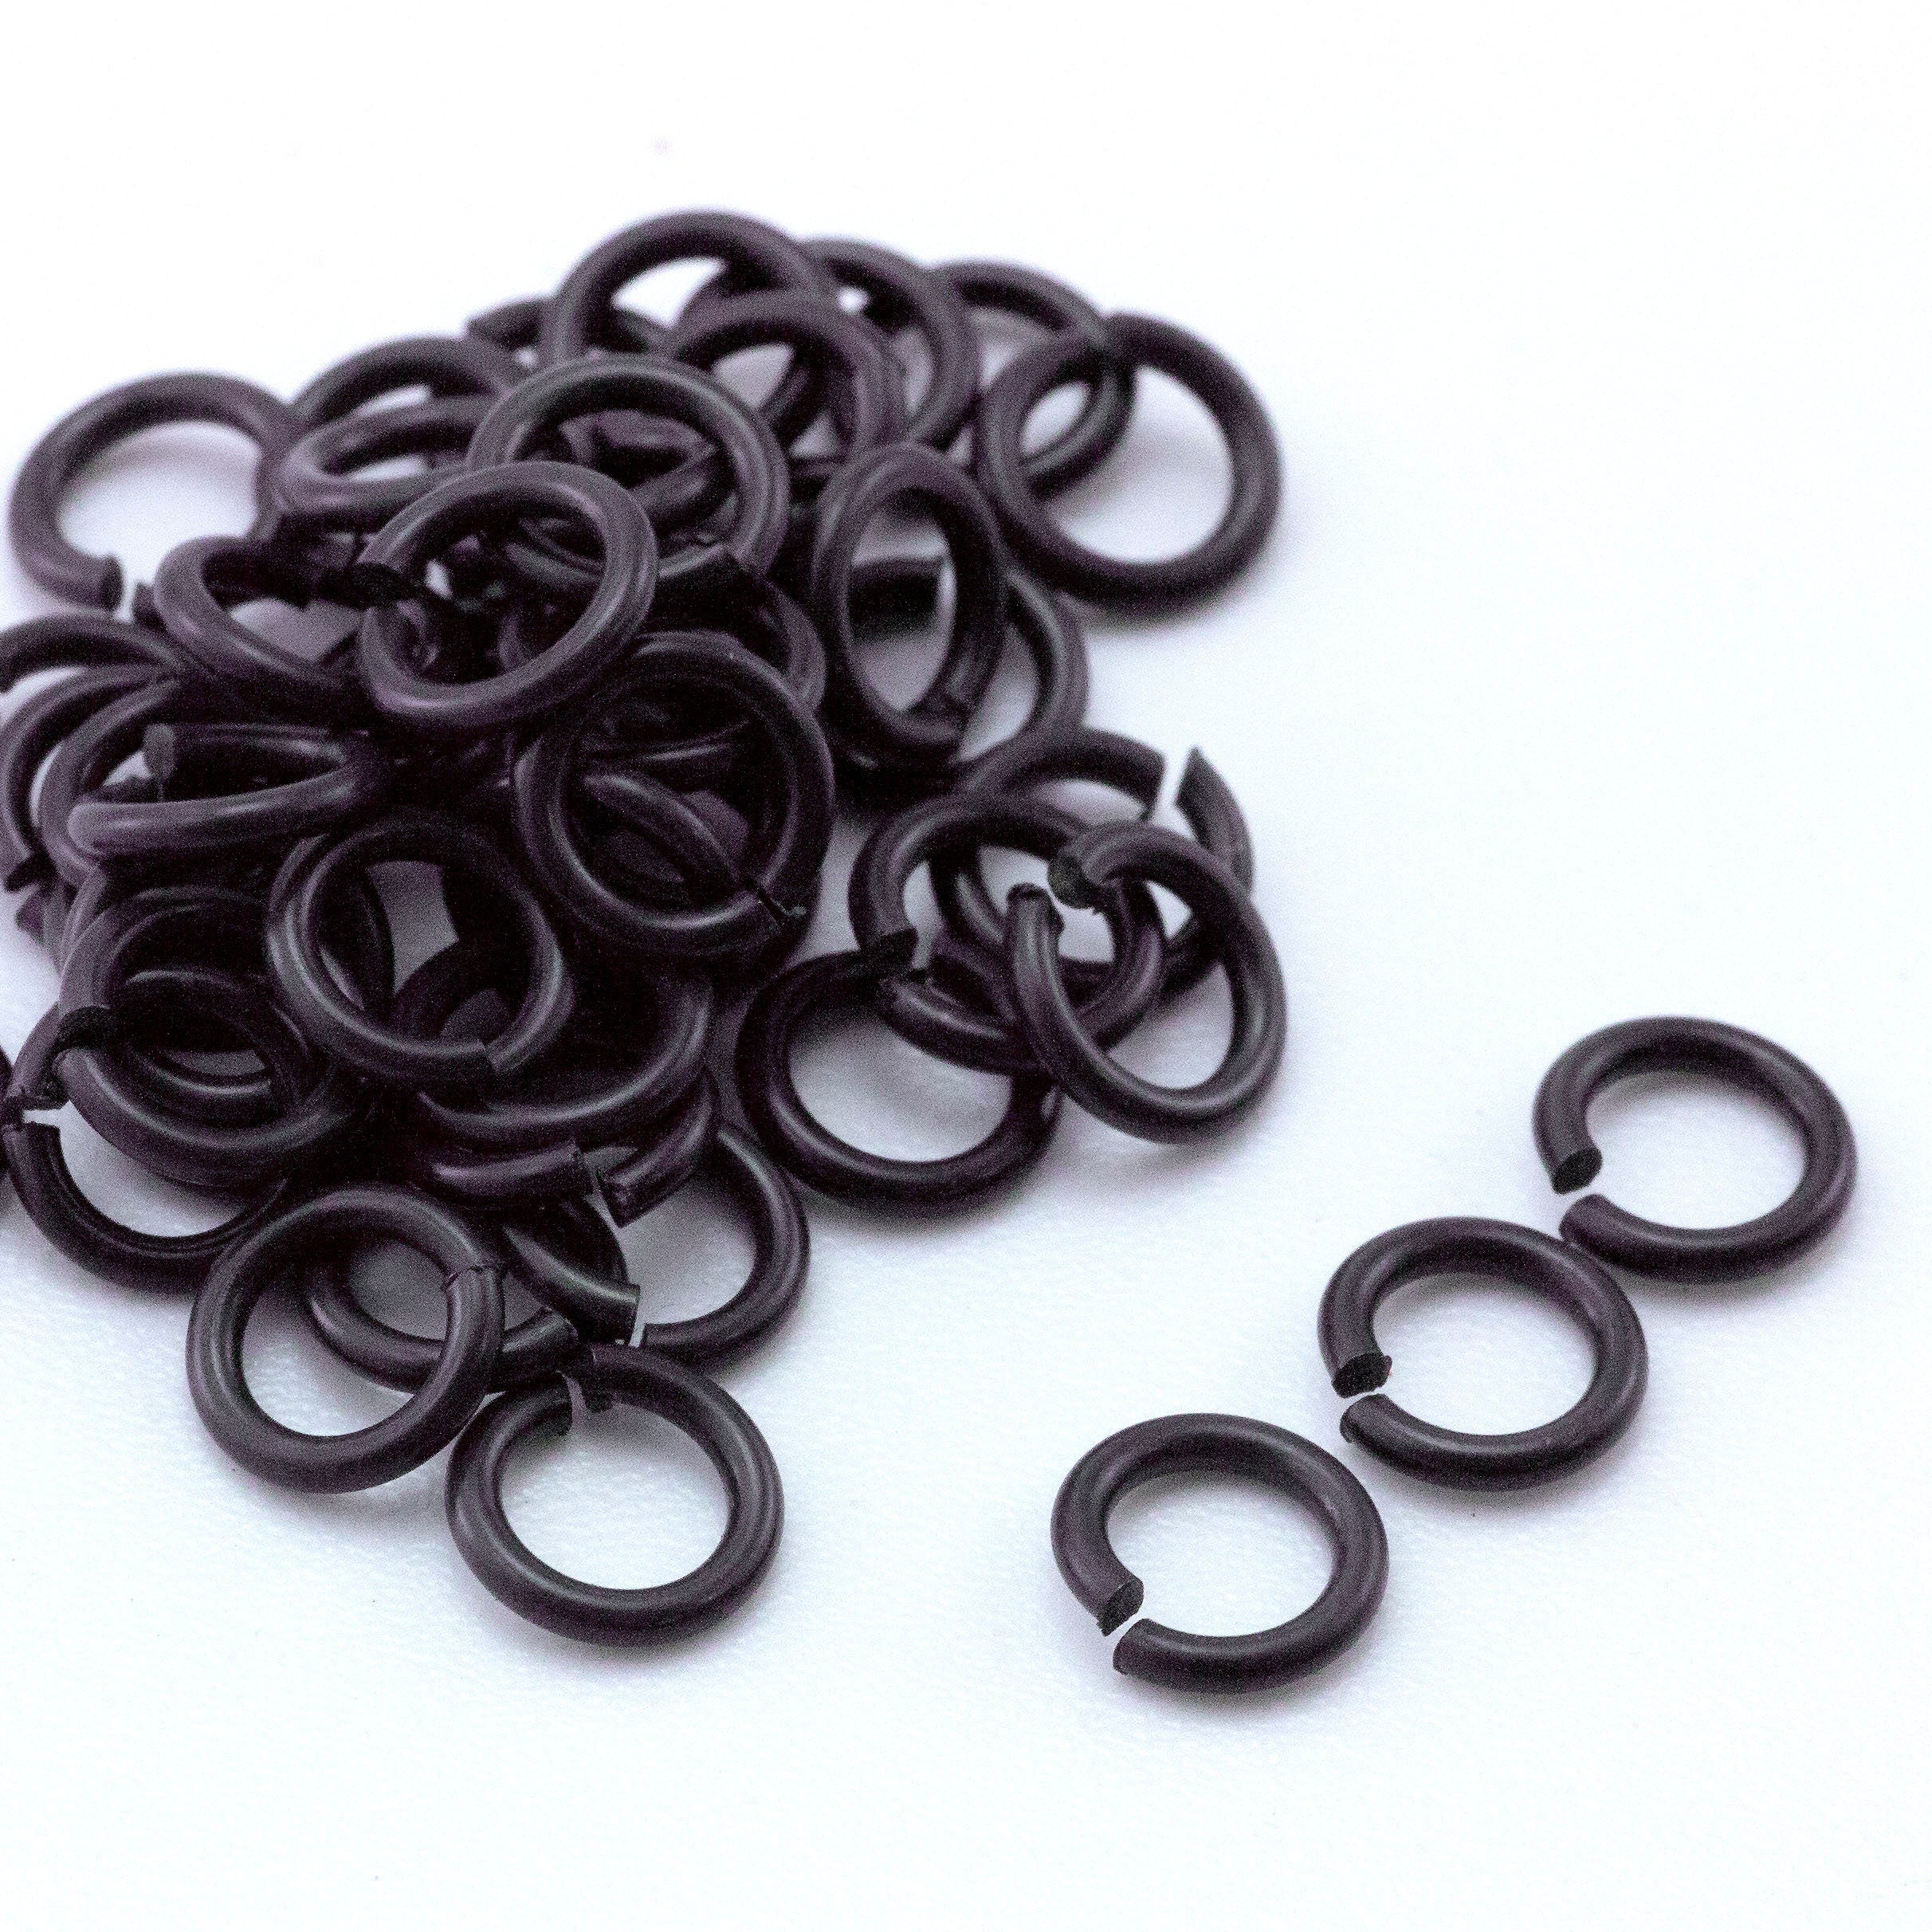 100 Glossy Black Anodized Niobium Jump Rings in Your Pick of